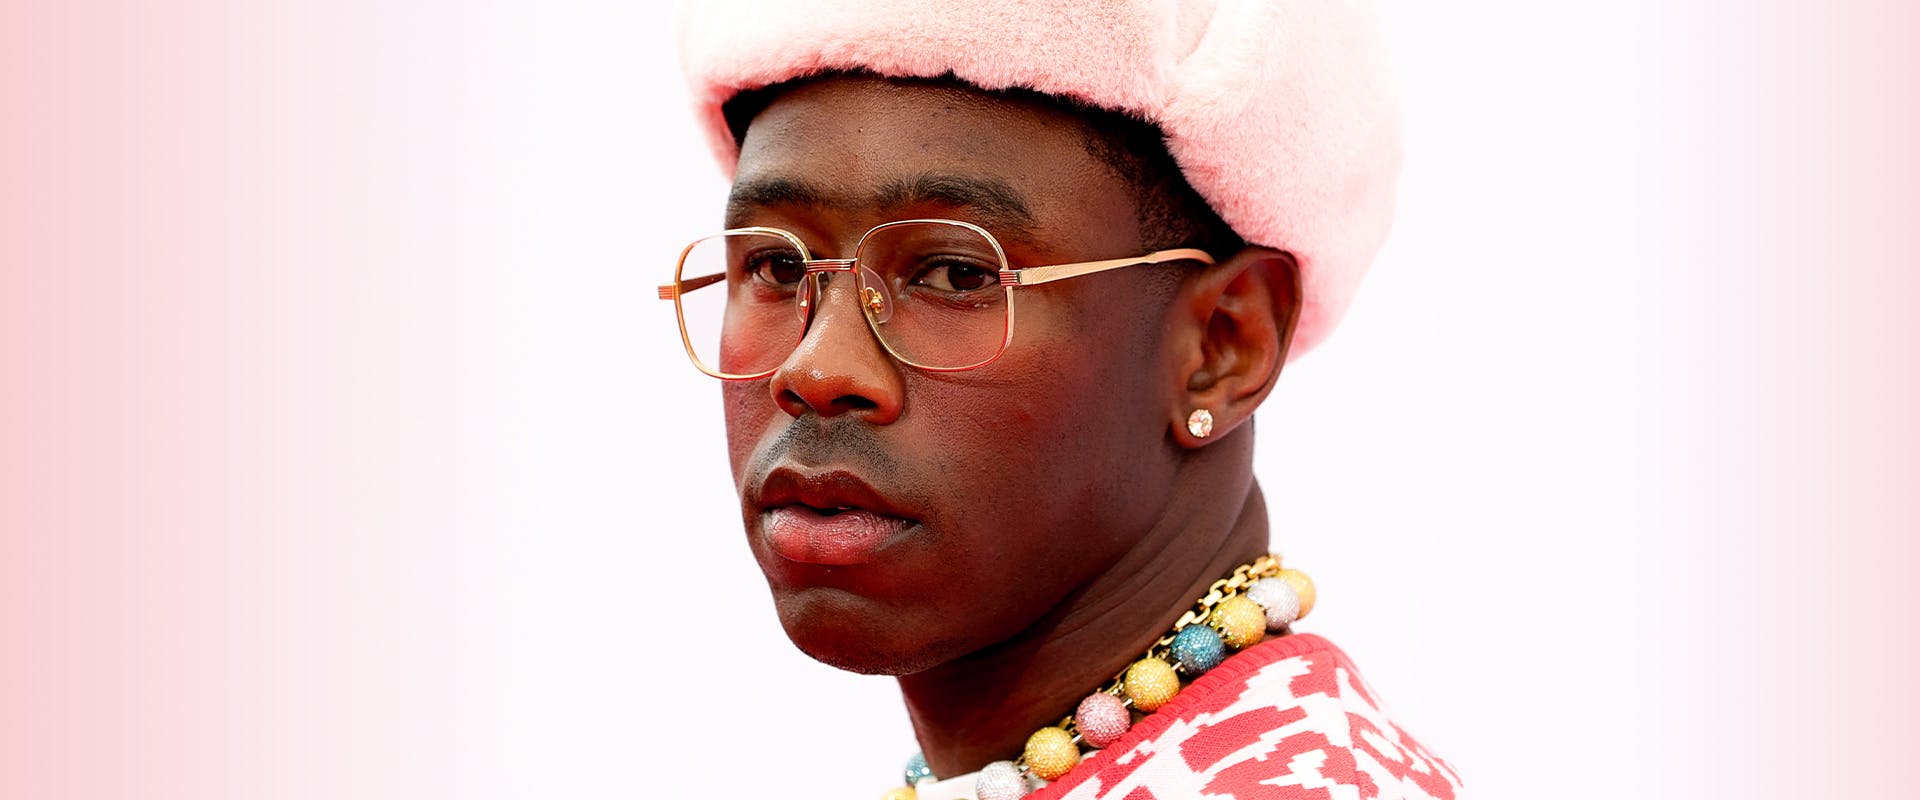 Tyler, The Creator's Latest Preppy Look Reflects Hip-Hop's Endless